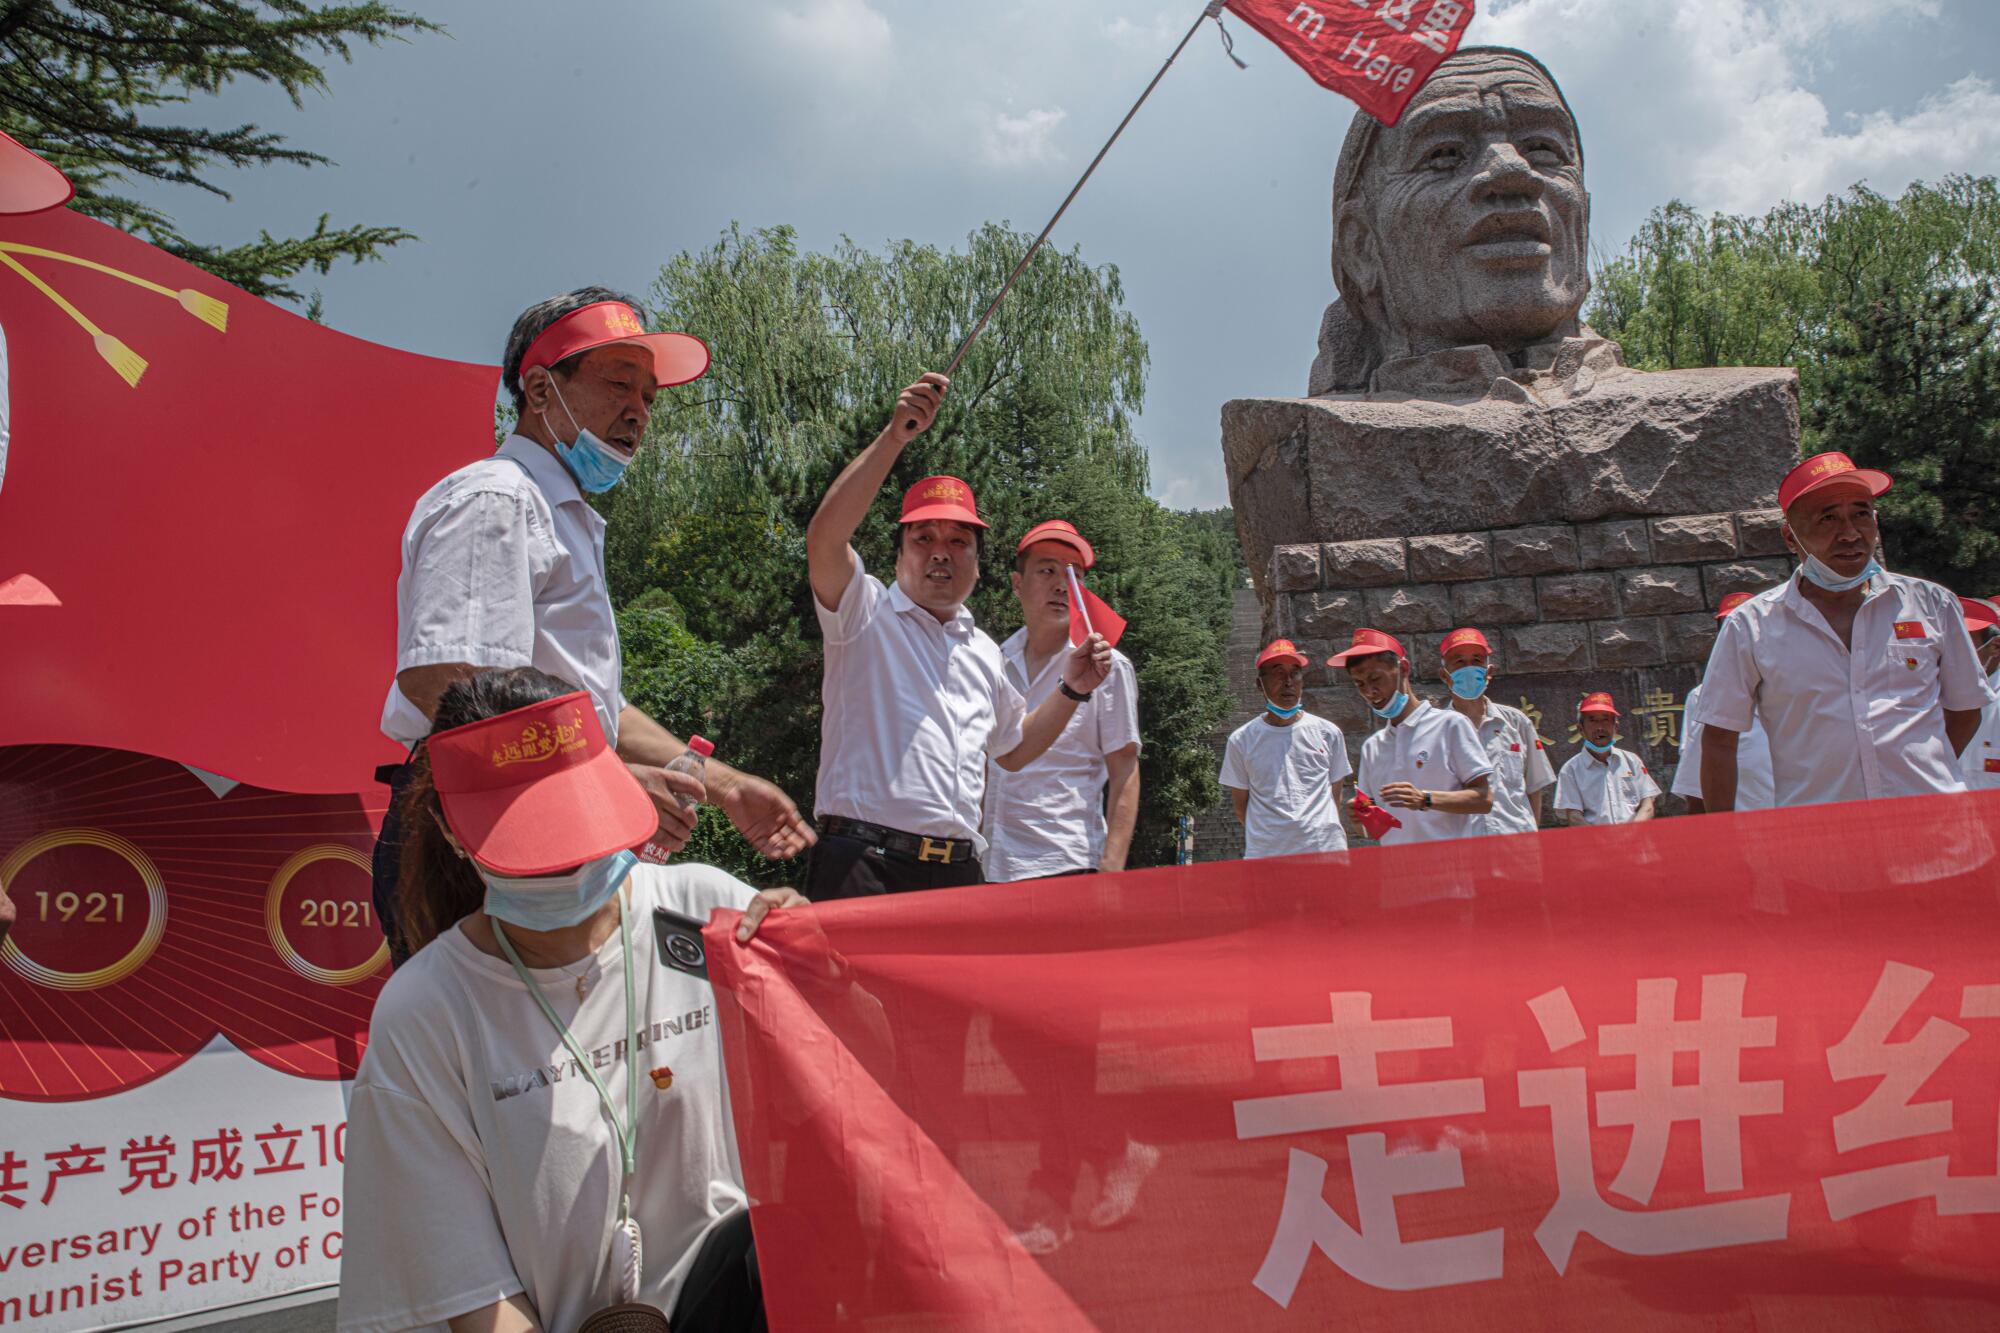 People in red visors and white shirts mill about near a large stone bust of a person  